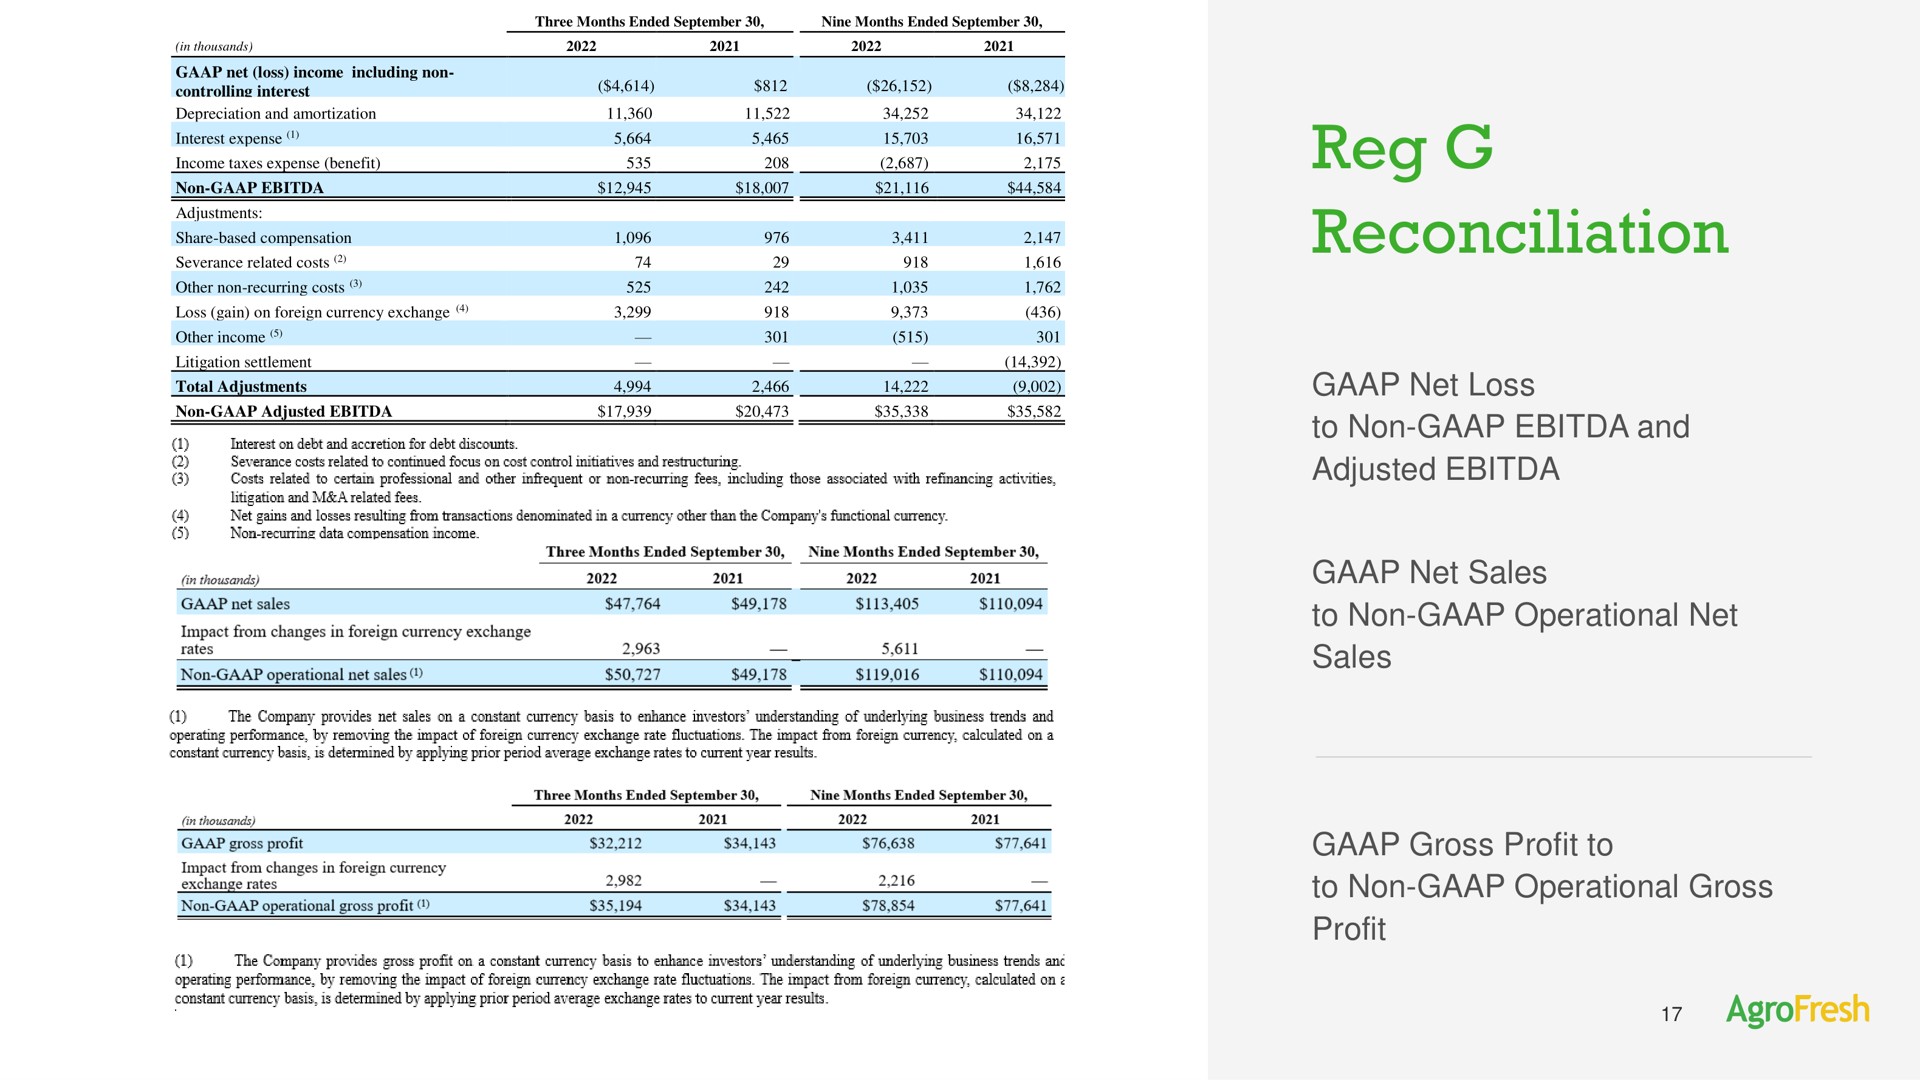 reg reconciliation net loss to non and adjusted net sales to non operational net sales gross profit to to non operational gross profit | AgroFresh